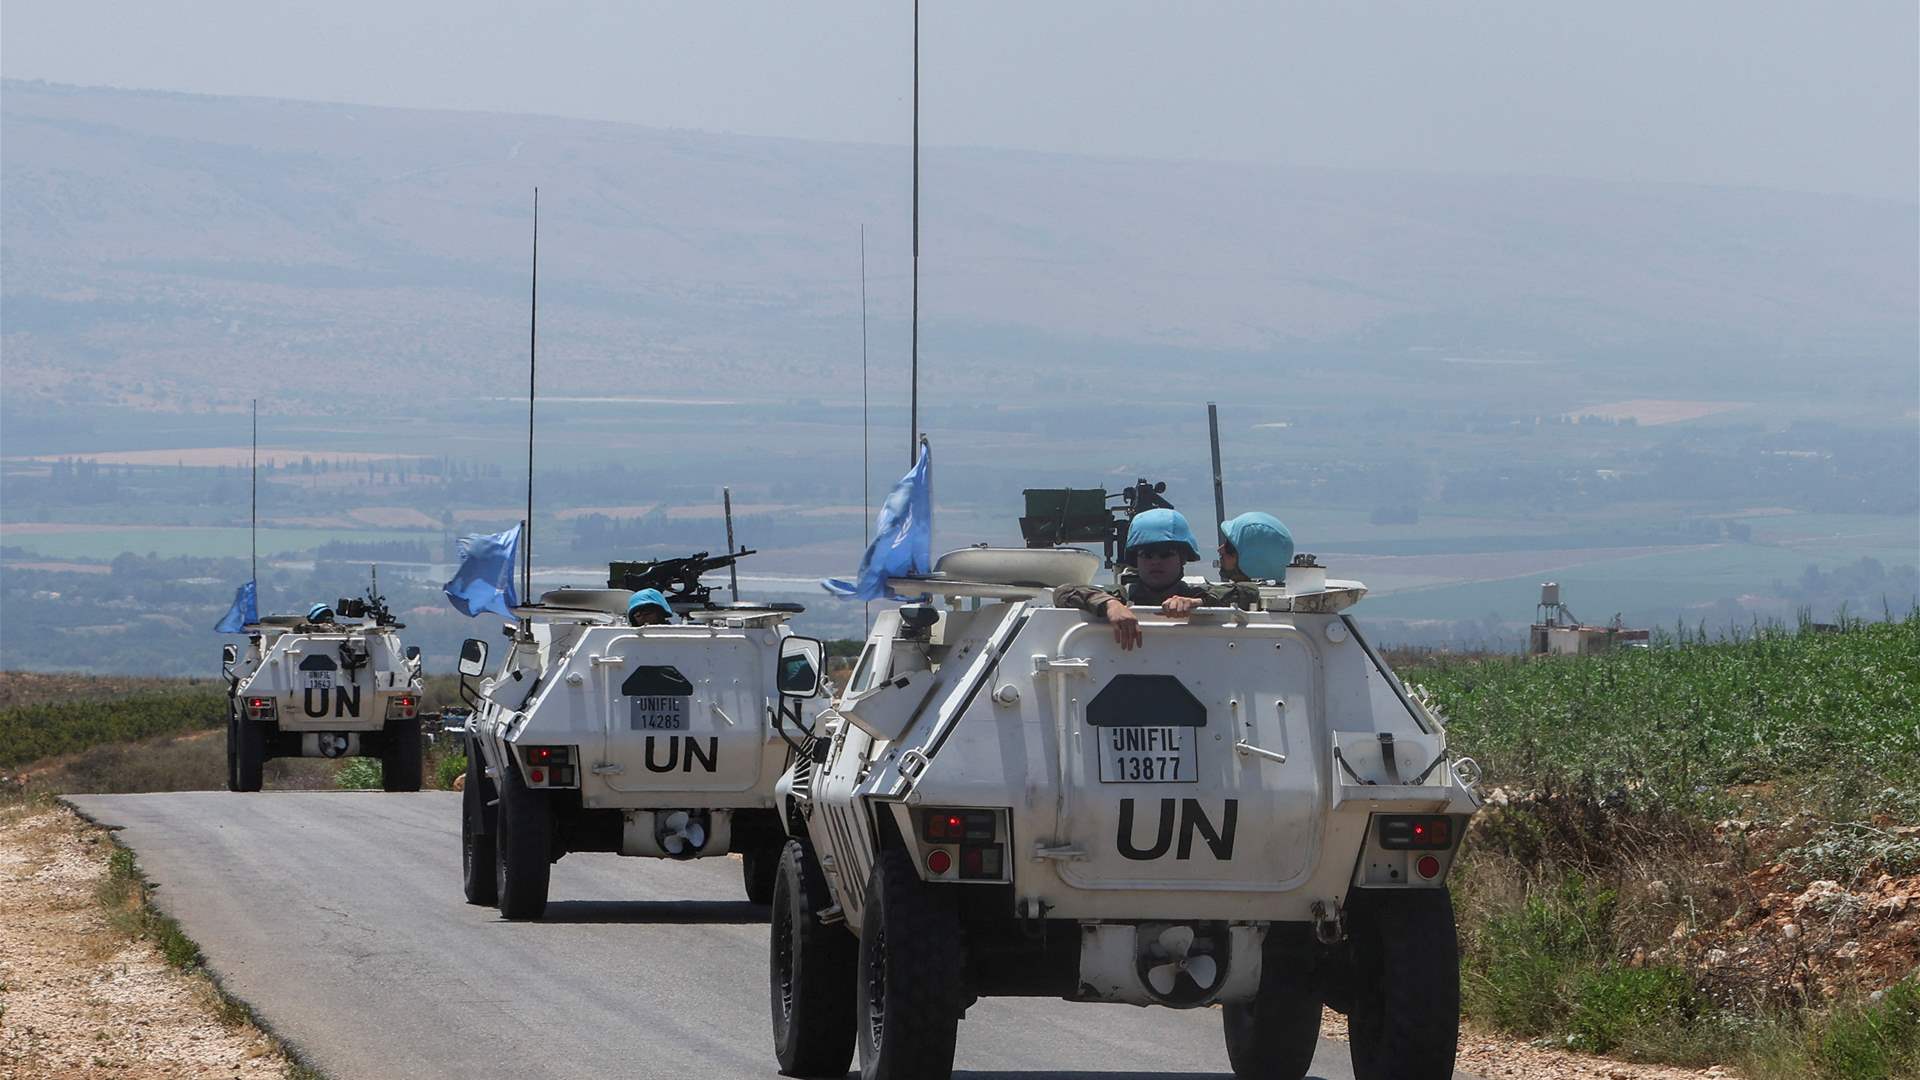 Lebanese diplomacy: Foreign Minister to begin official talks in New York on UNIFIL extension